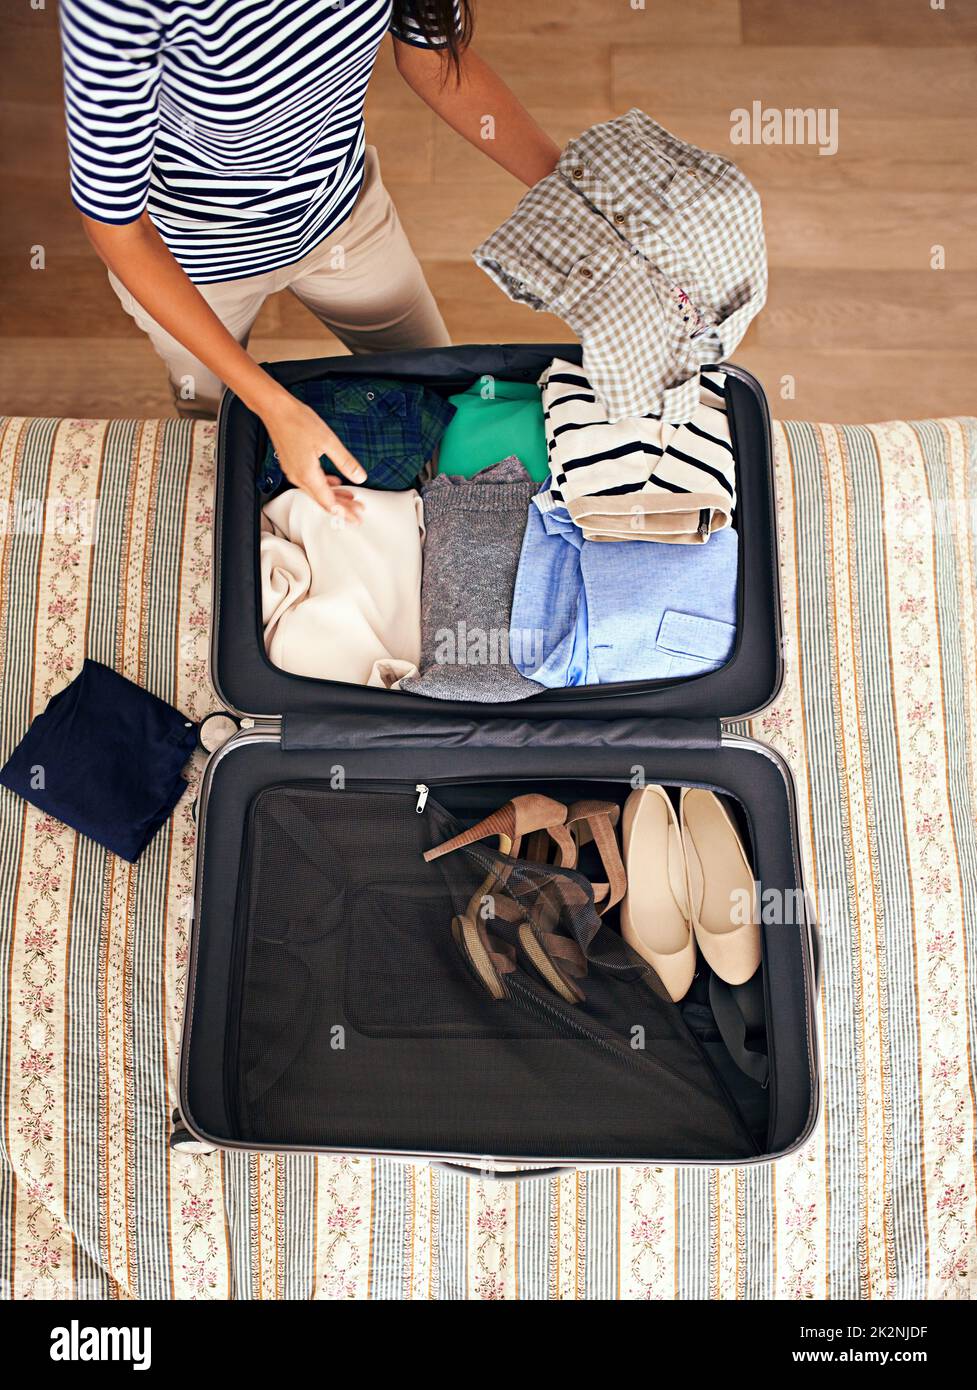 Premium Photo  Woman packing clothes in luggage for new journey